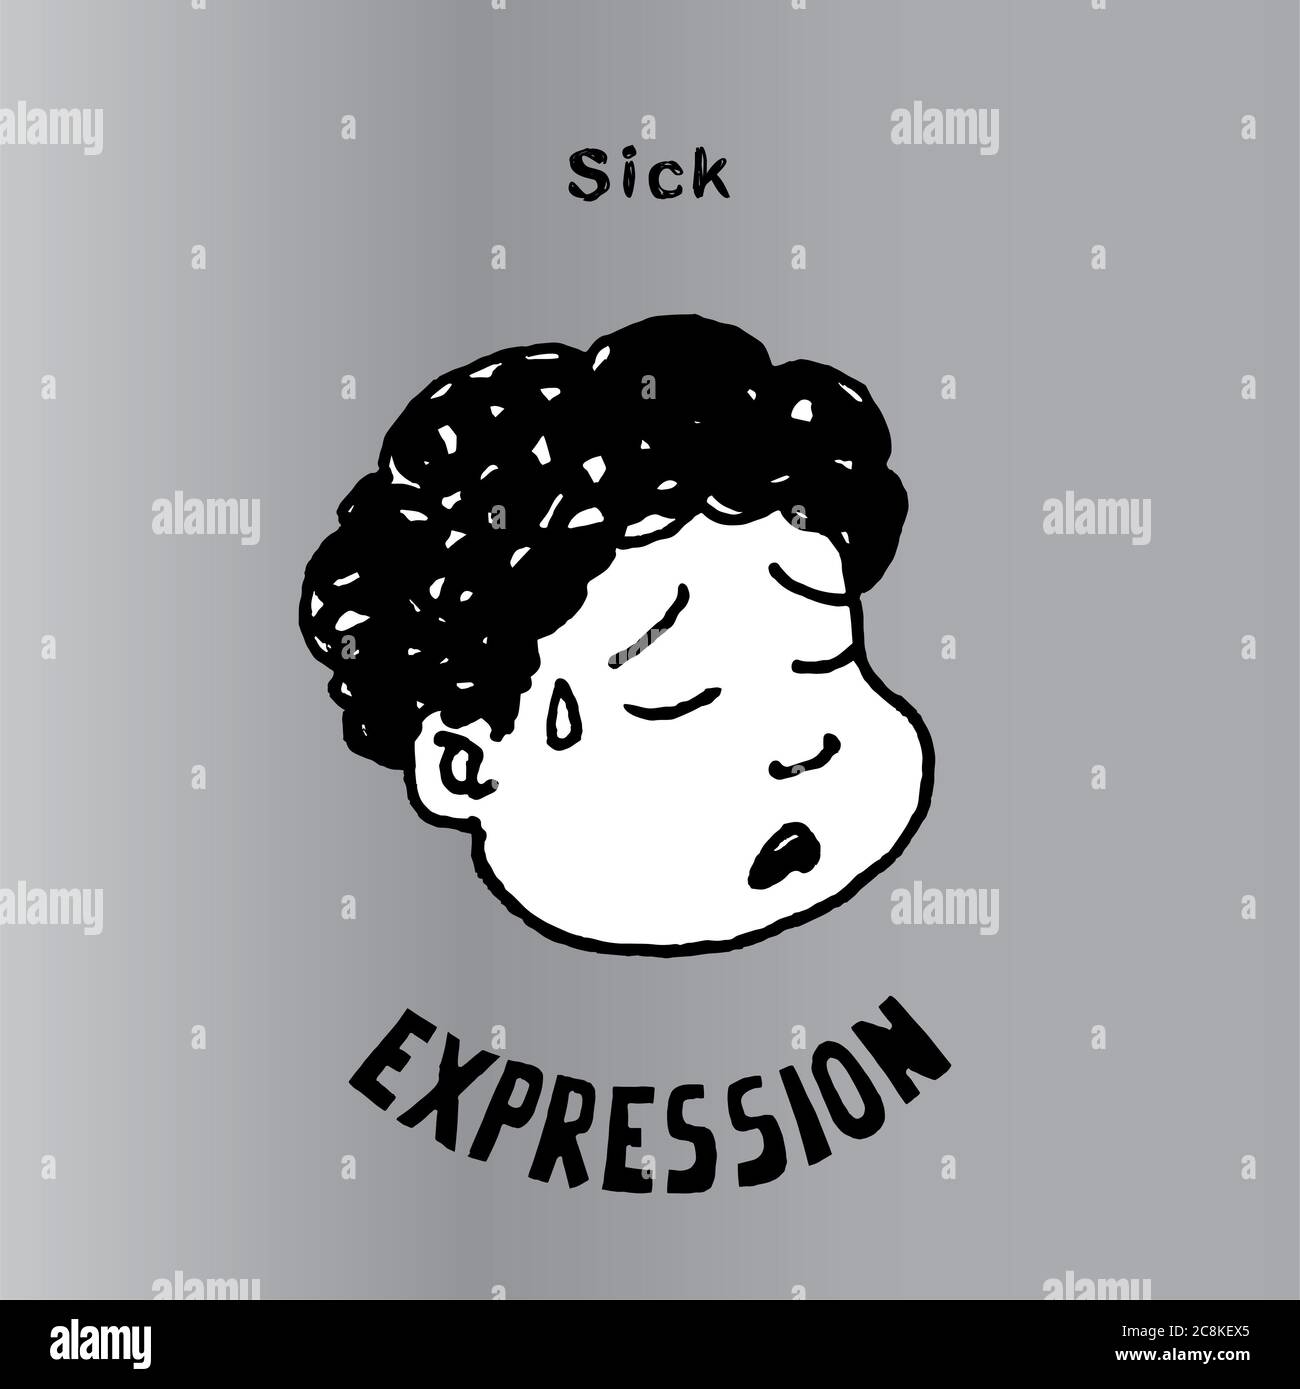 Sick face vector illustration. Interesting Cartoon character of Sick. Used as emoticons and emojis. Stock Photo